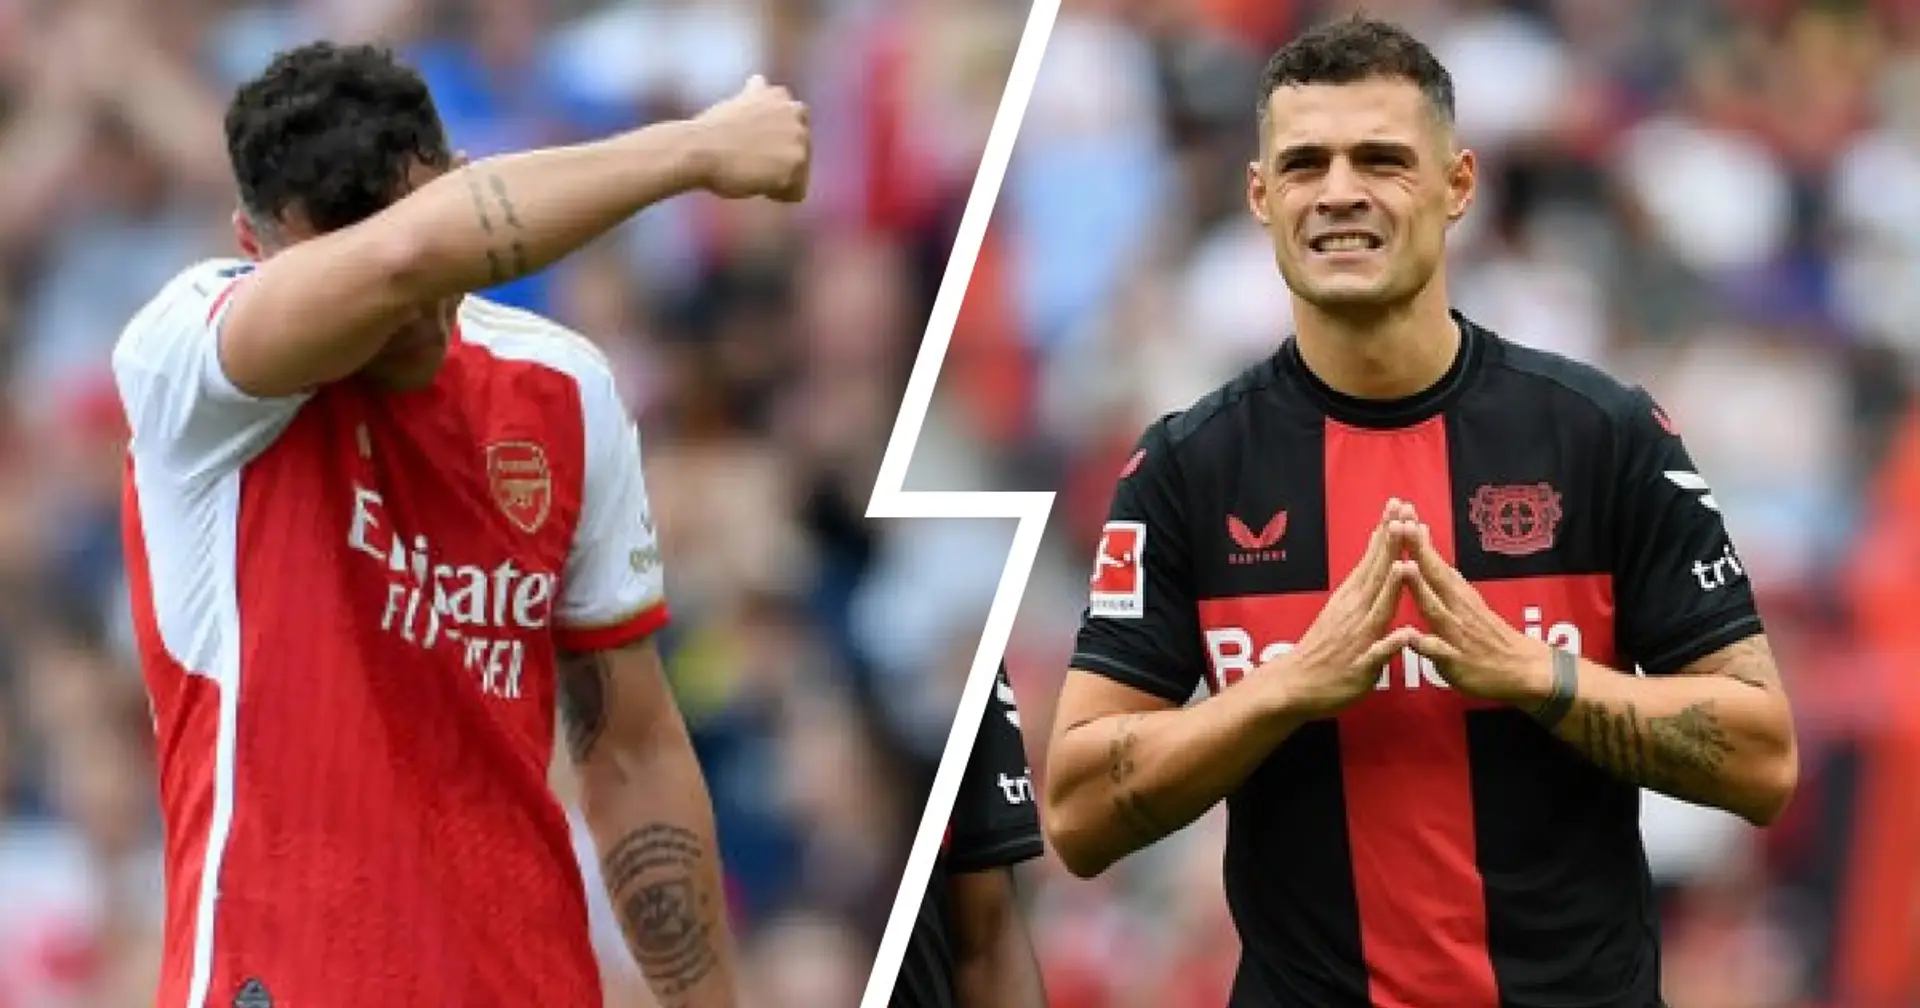 Xhaka admits he cried after joining Leverkusen - not because he misses Arsenal 